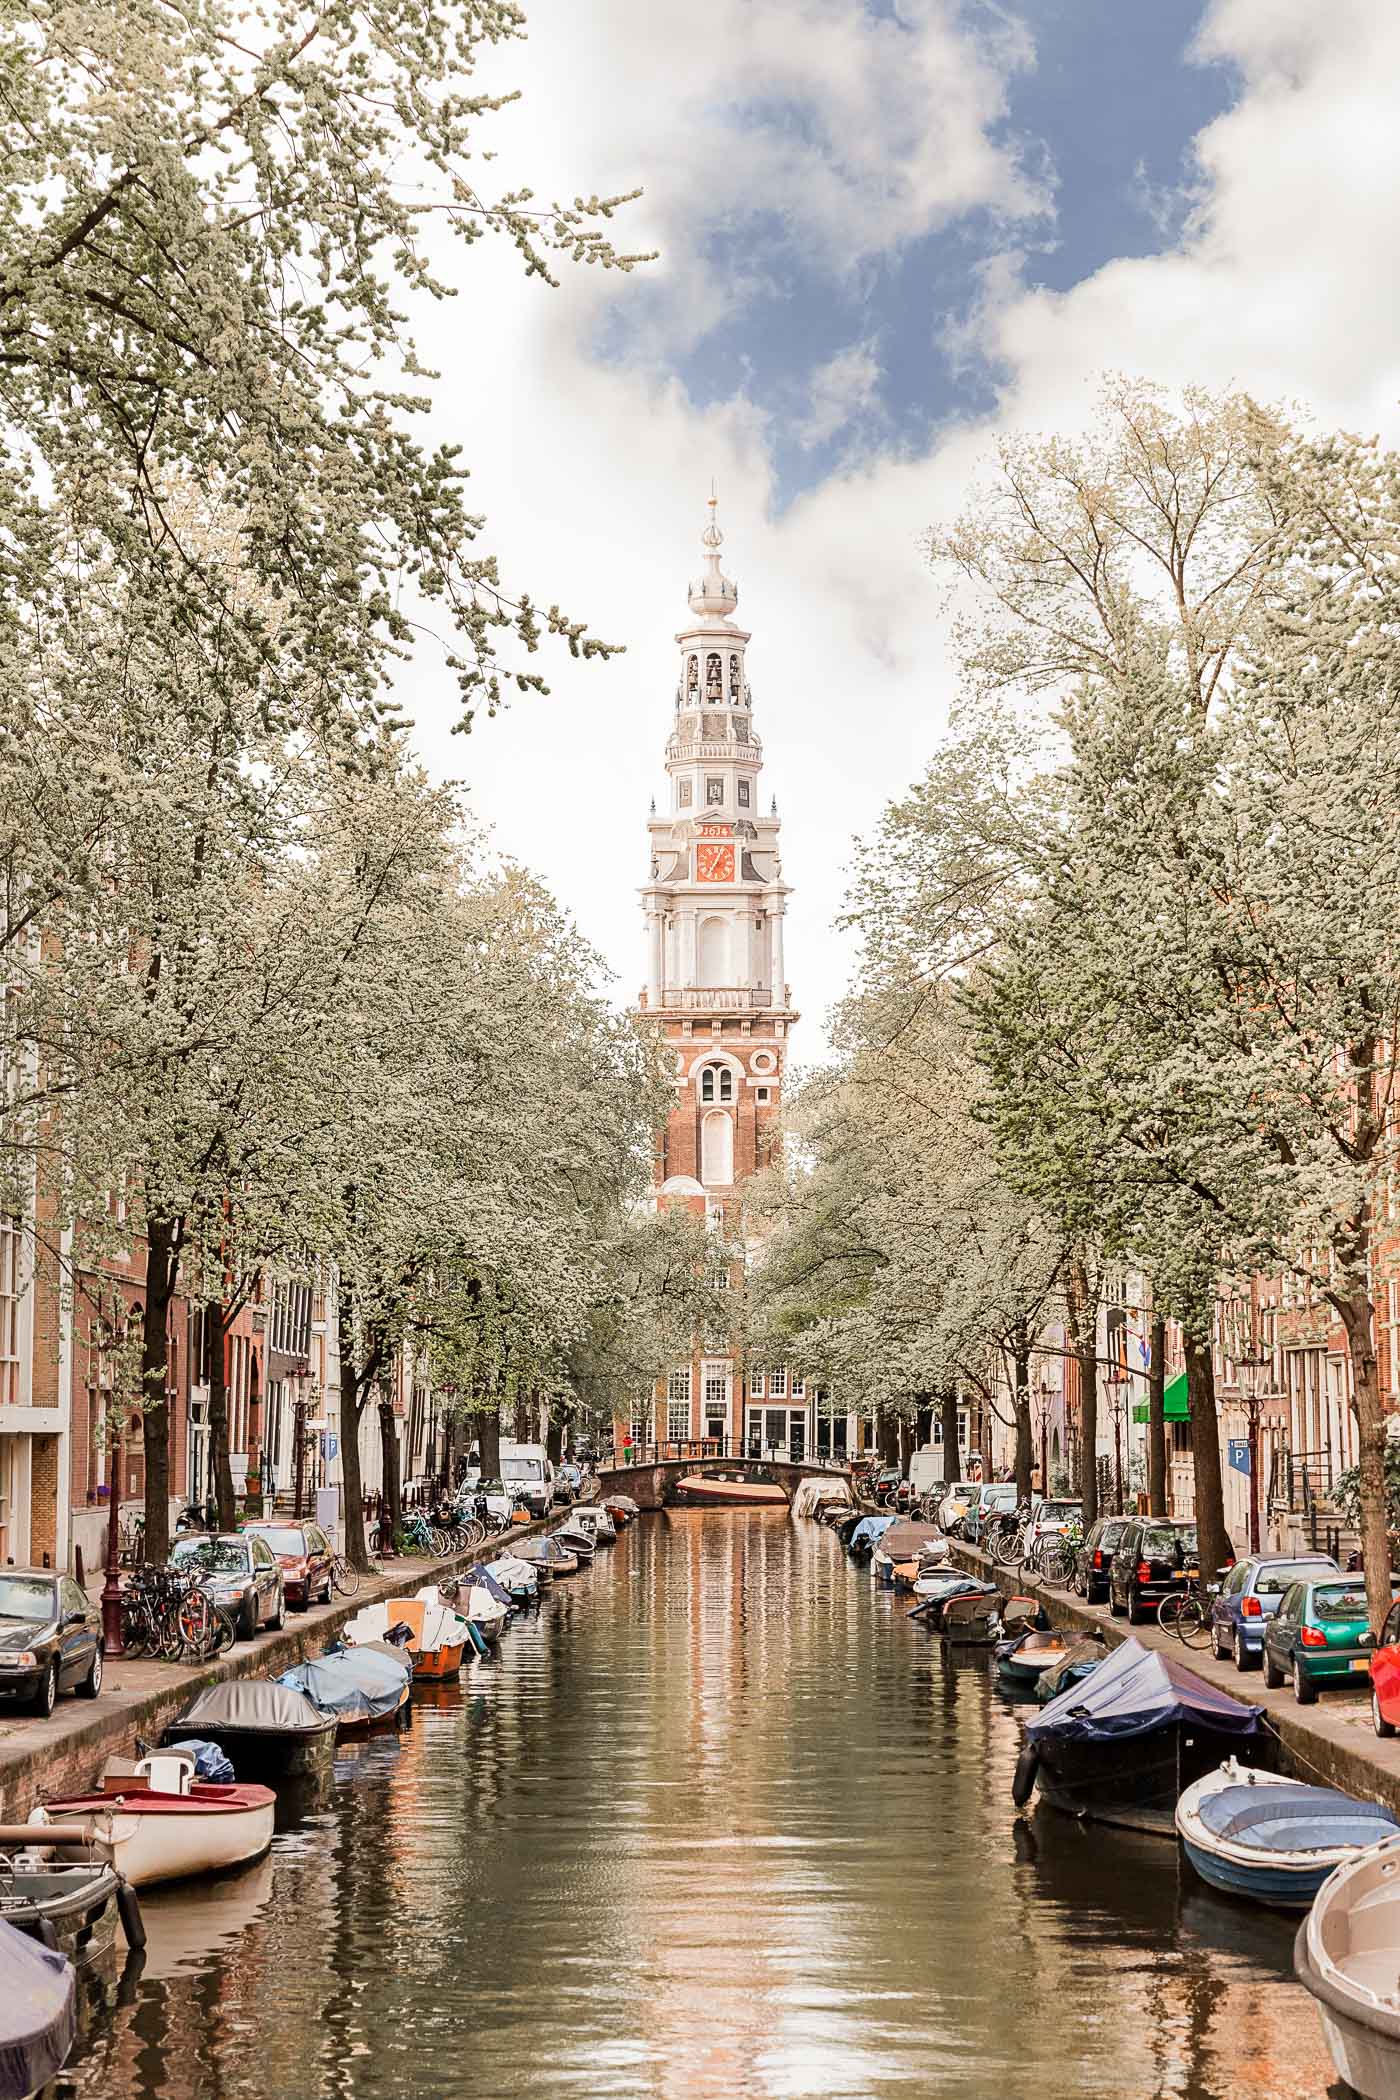 Guide to Amsterdam, 15 awesome things to do as told by a local.